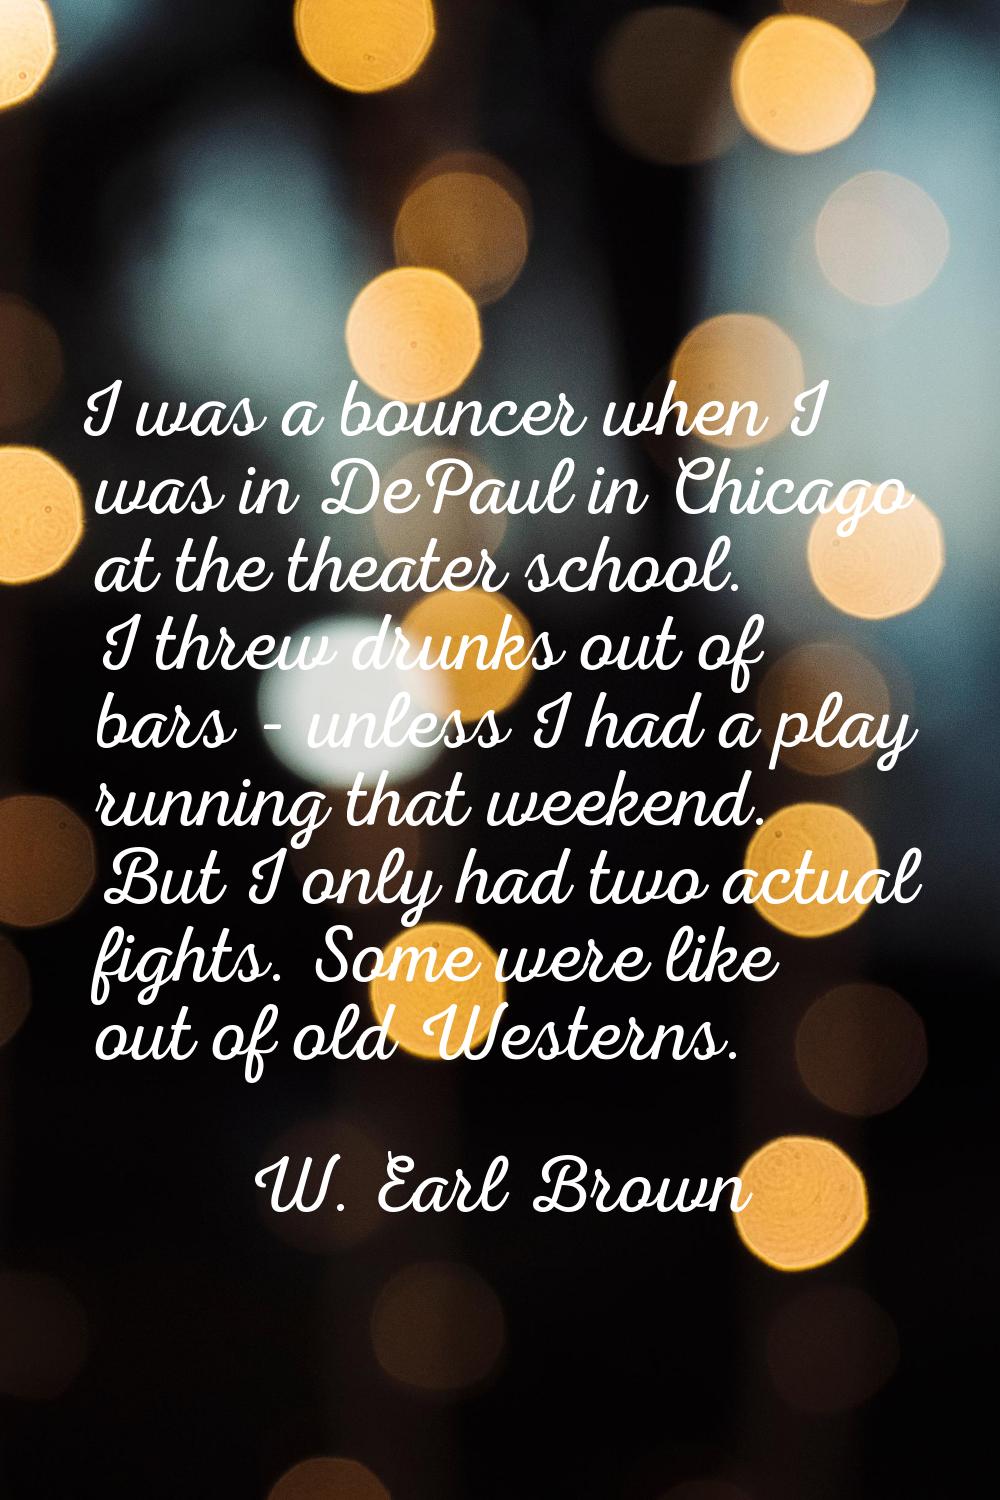 I was a bouncer when I was in DePaul in Chicago at the theater school. I threw drunks out of bars -